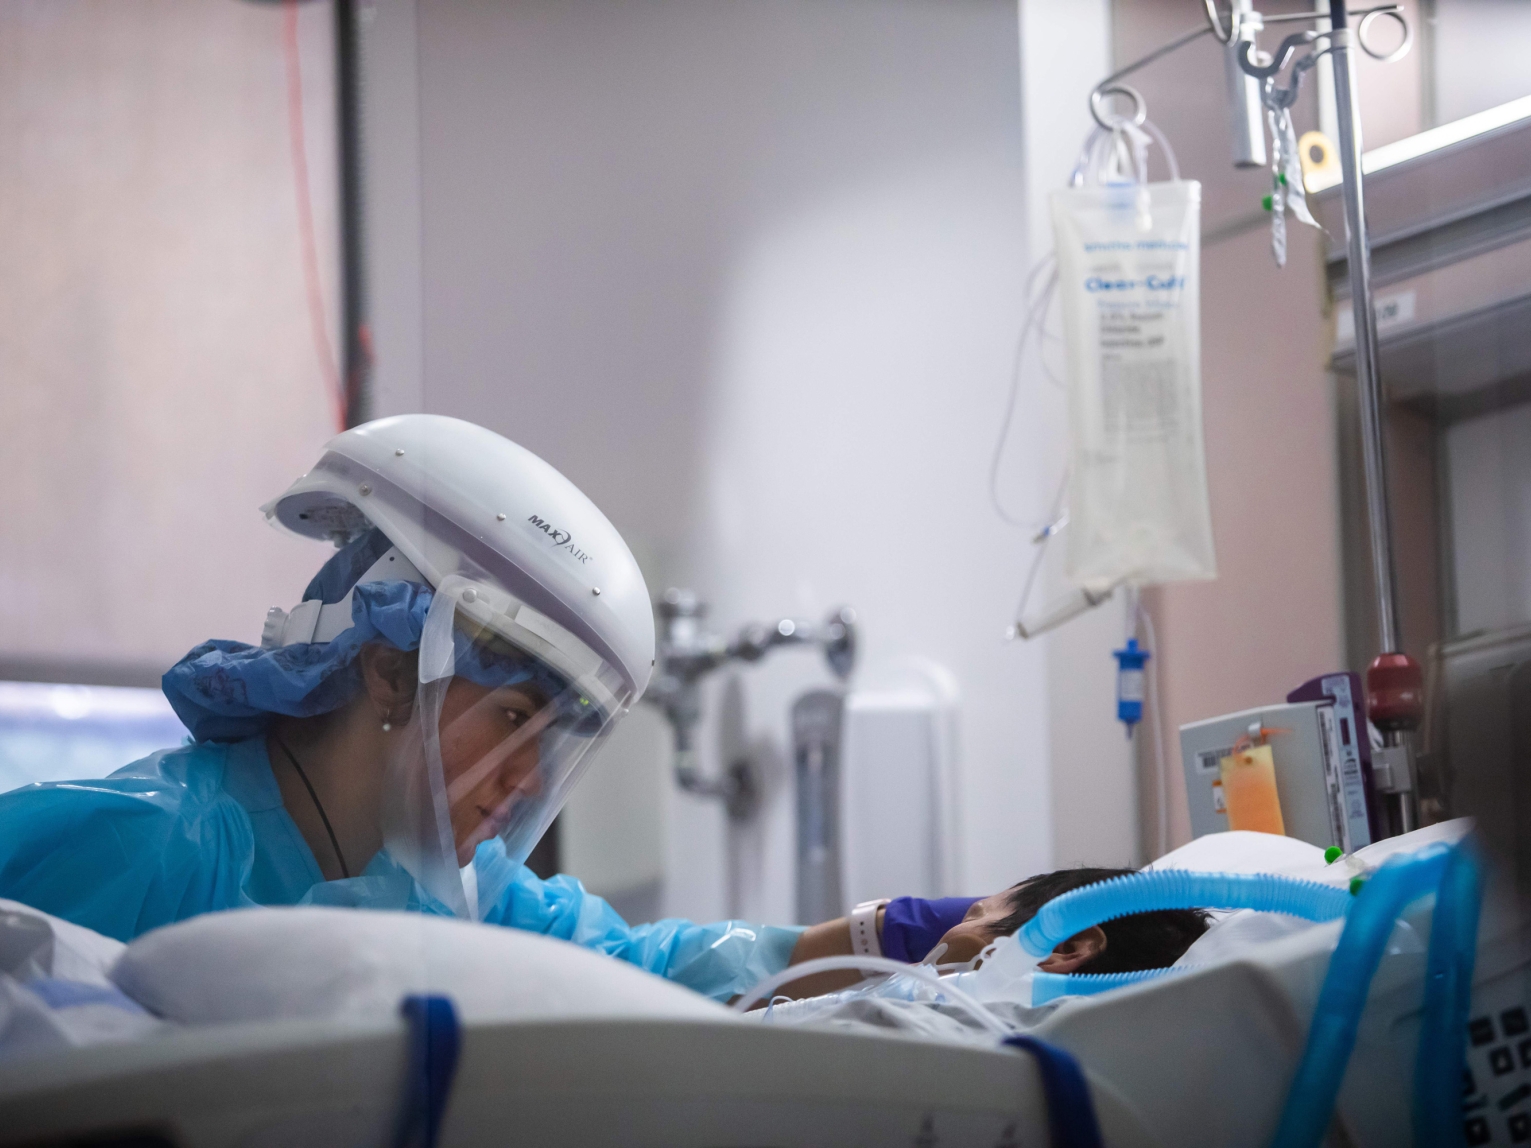 Registered nurse Yeni Sandoval wears personal protective equipment while she cares for a COVID-19 patient in the Intensive Care Unit at Providence Cedars-Sinai Tarzana Medical Center in Tarzana, California, on January 3, 2021.